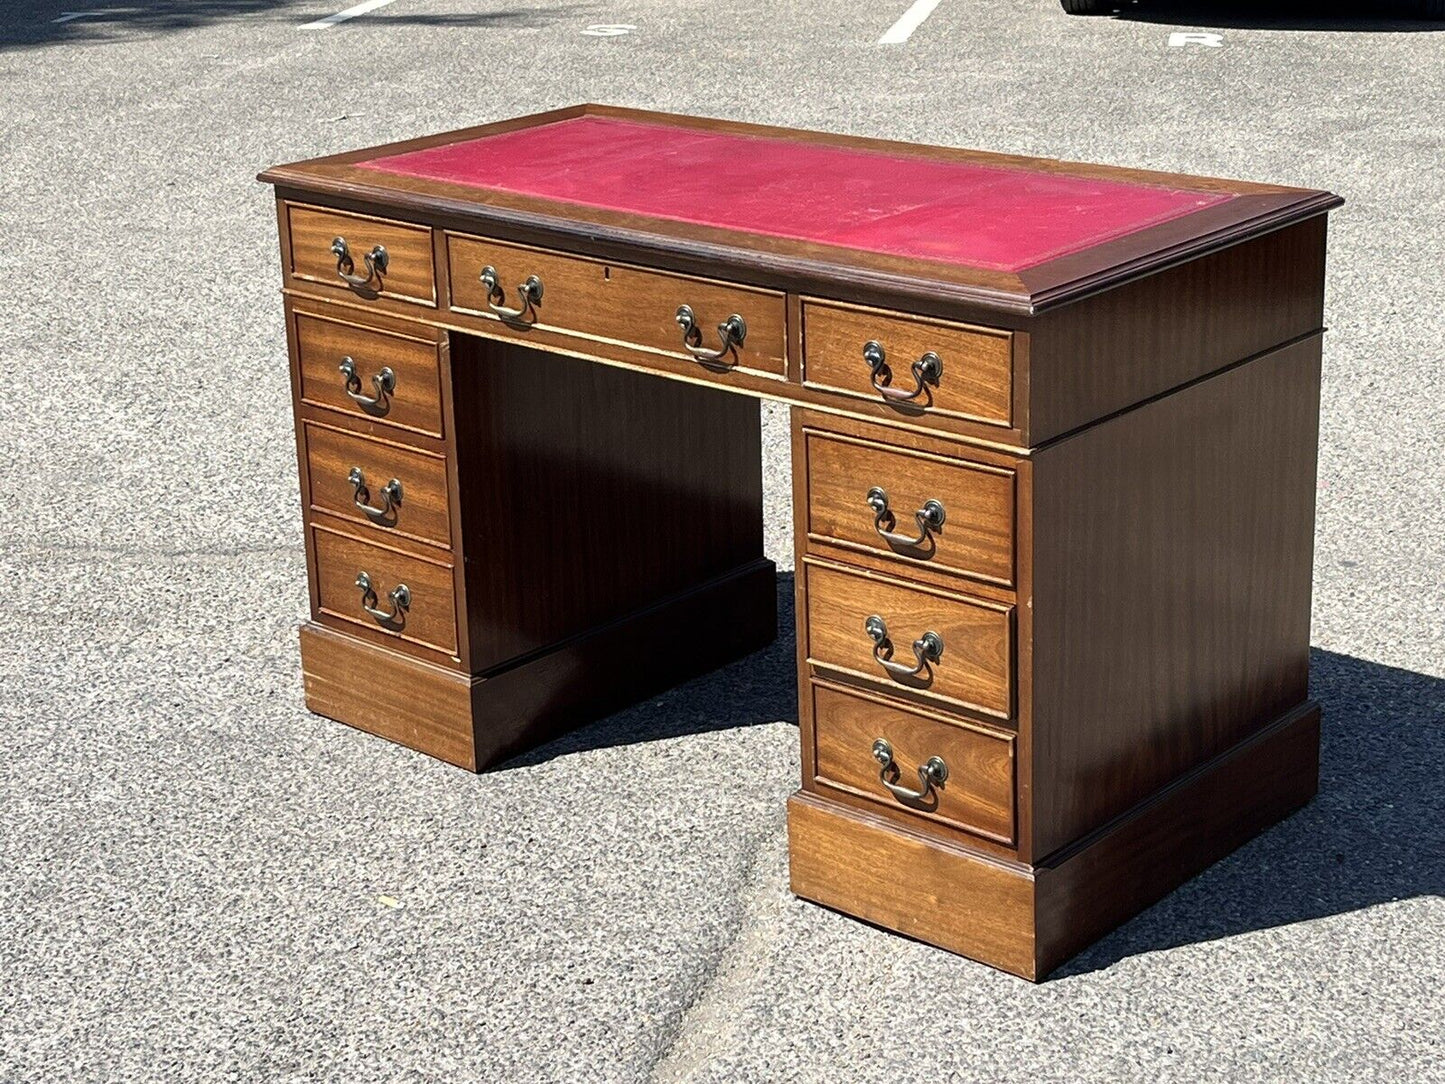 Pedestal Desk With Red Leather Top.